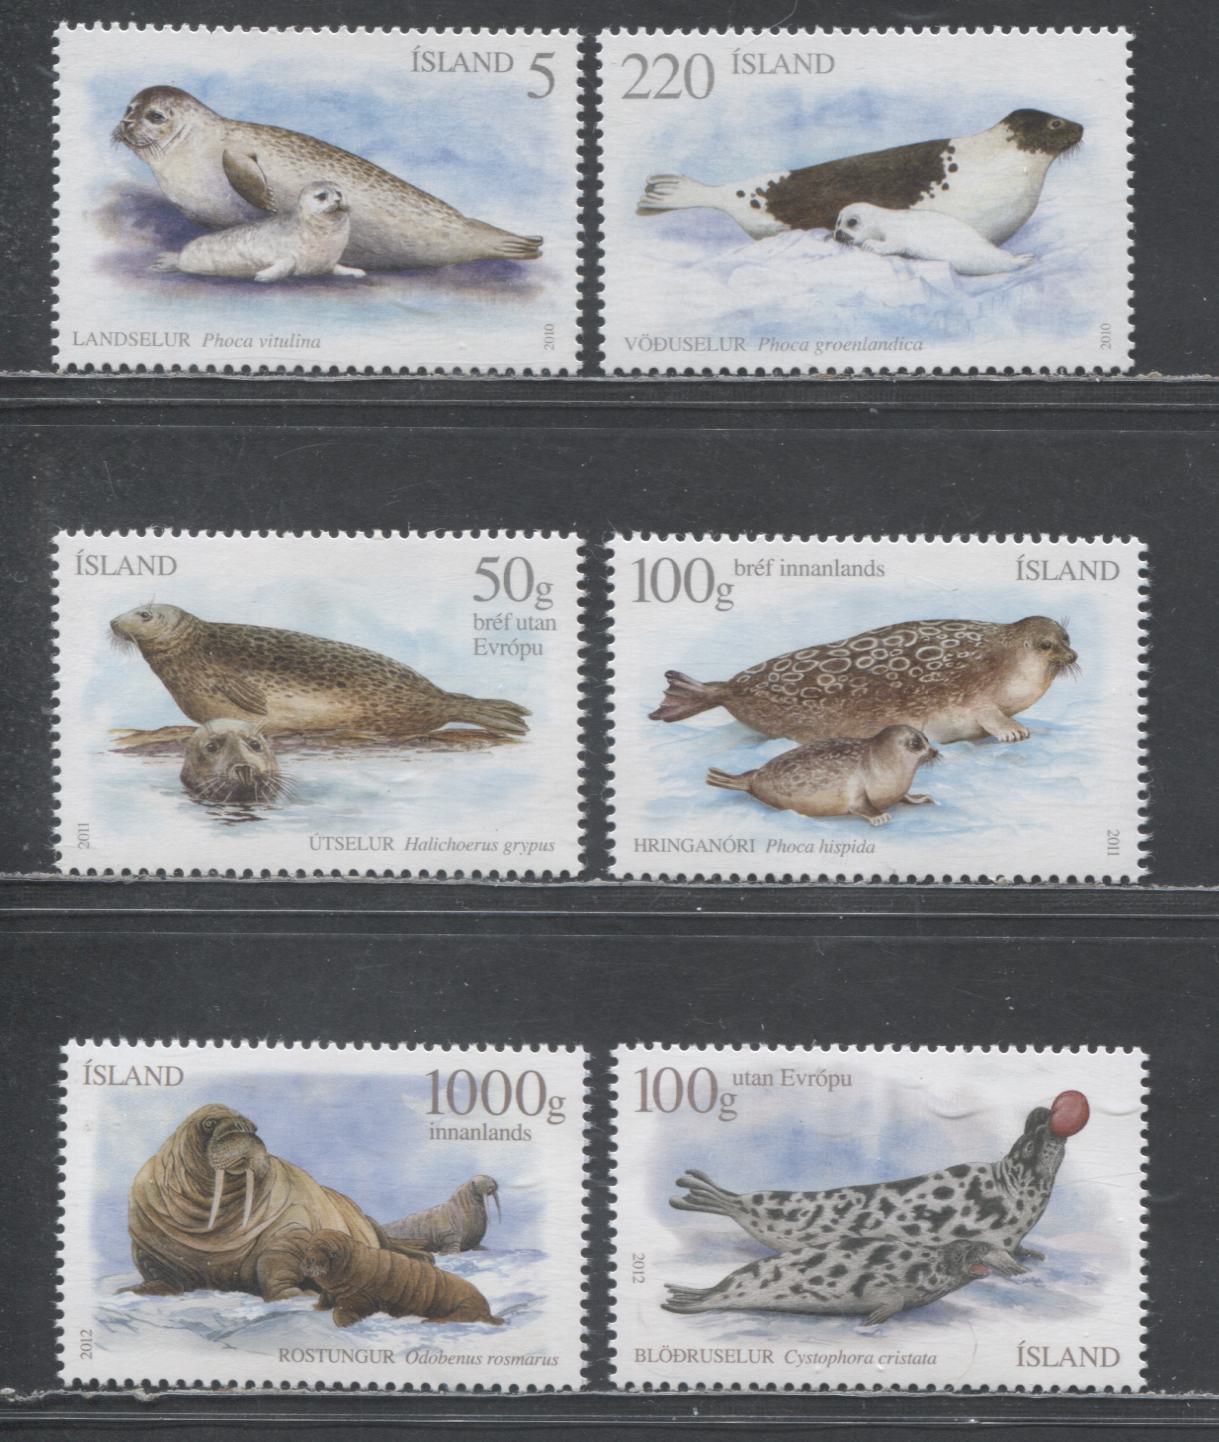 Lot 50 Iceland SC#1183/1281 2010-2012 Seals Issue, 2 VFNH Singles, Click on Listing to See ALL Pictures, 2017 Scott Cat. $23.75